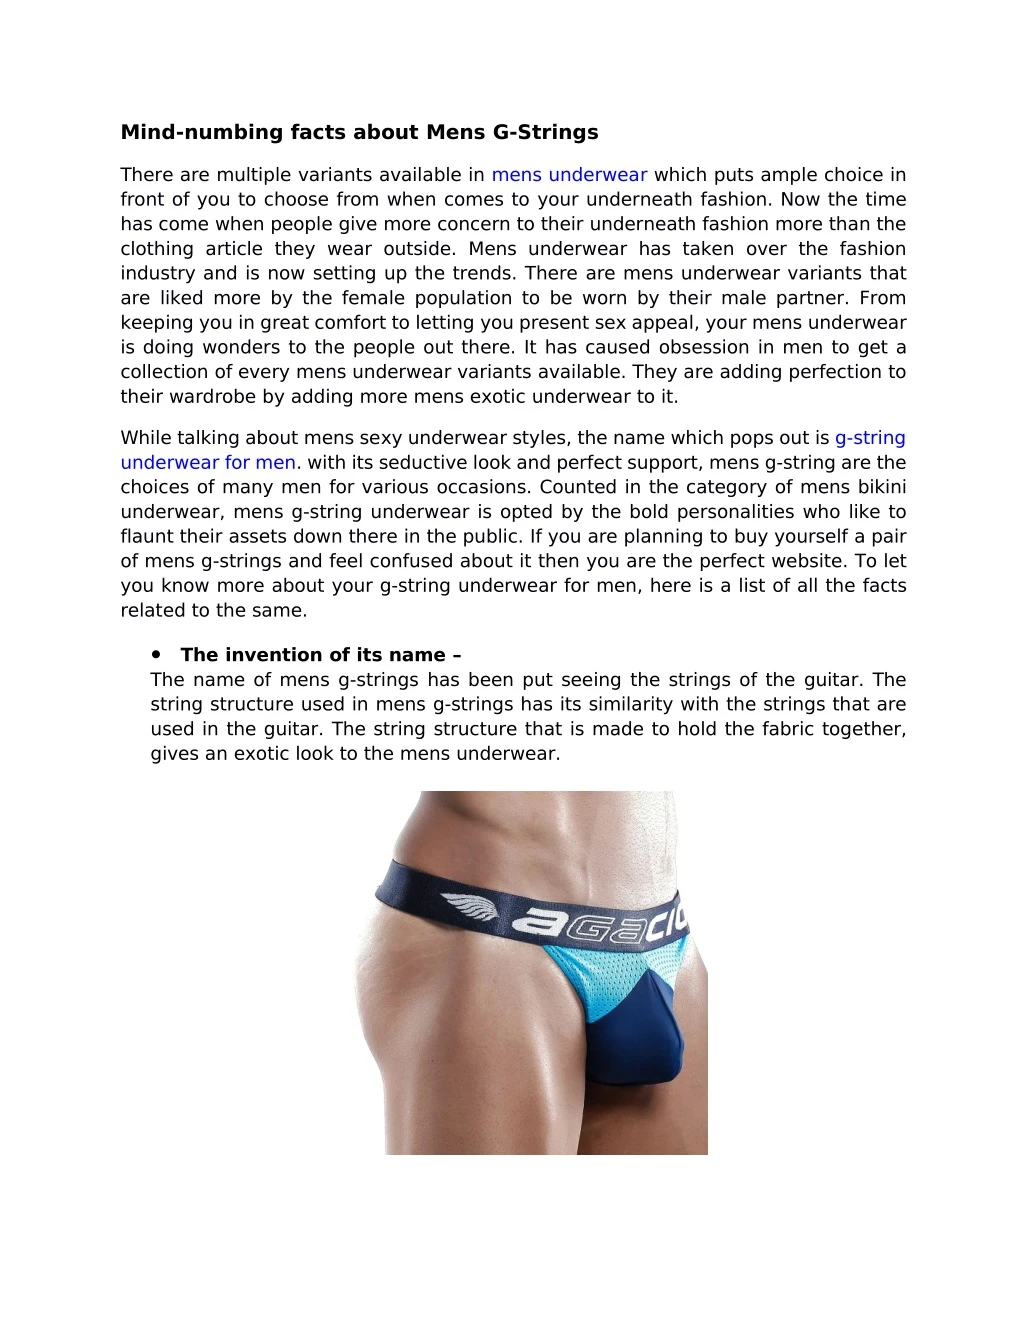 mind numbing facts about mens g strings